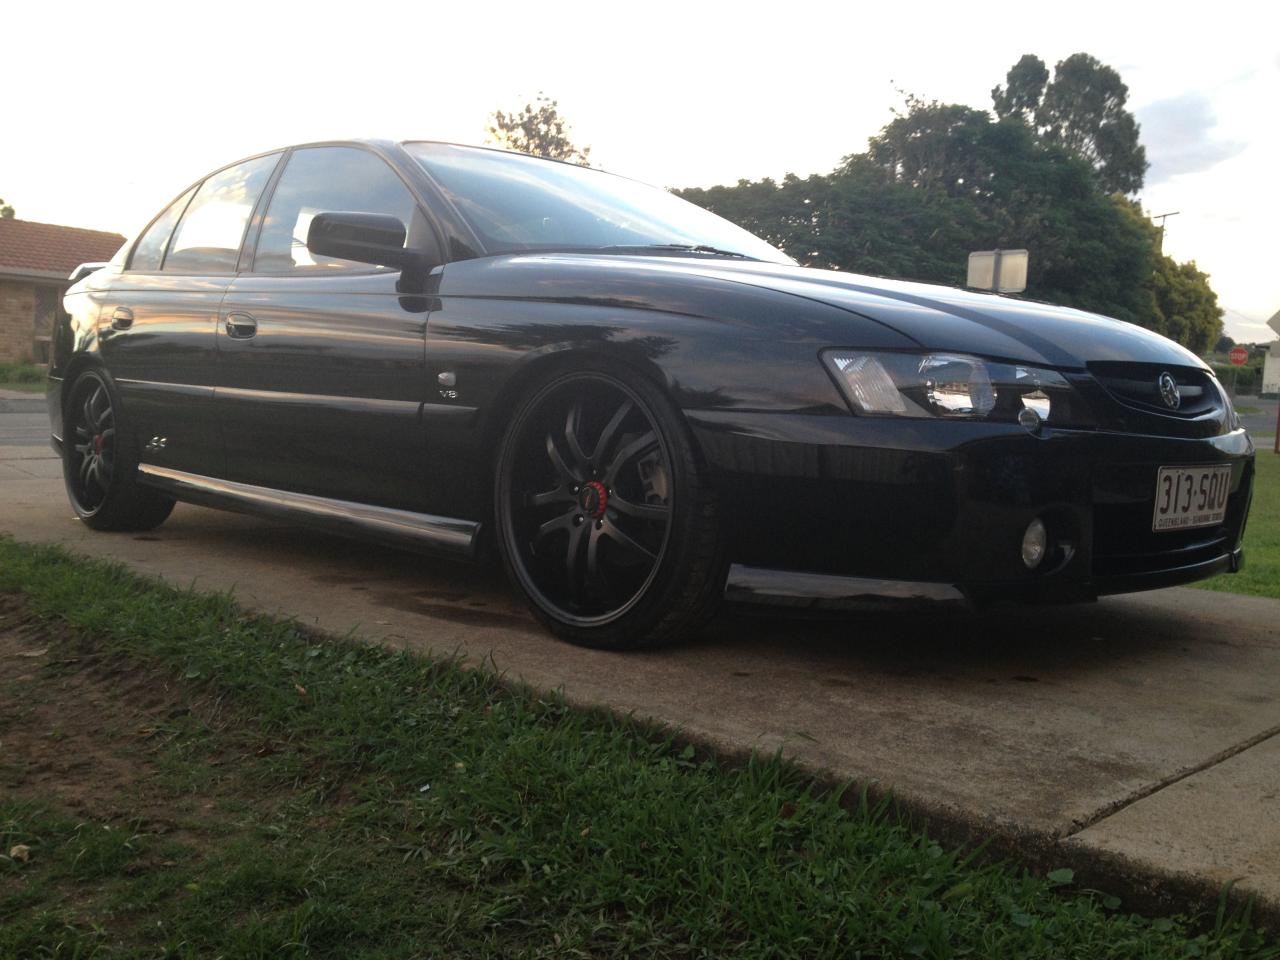 2004 Holden Commodore Ss